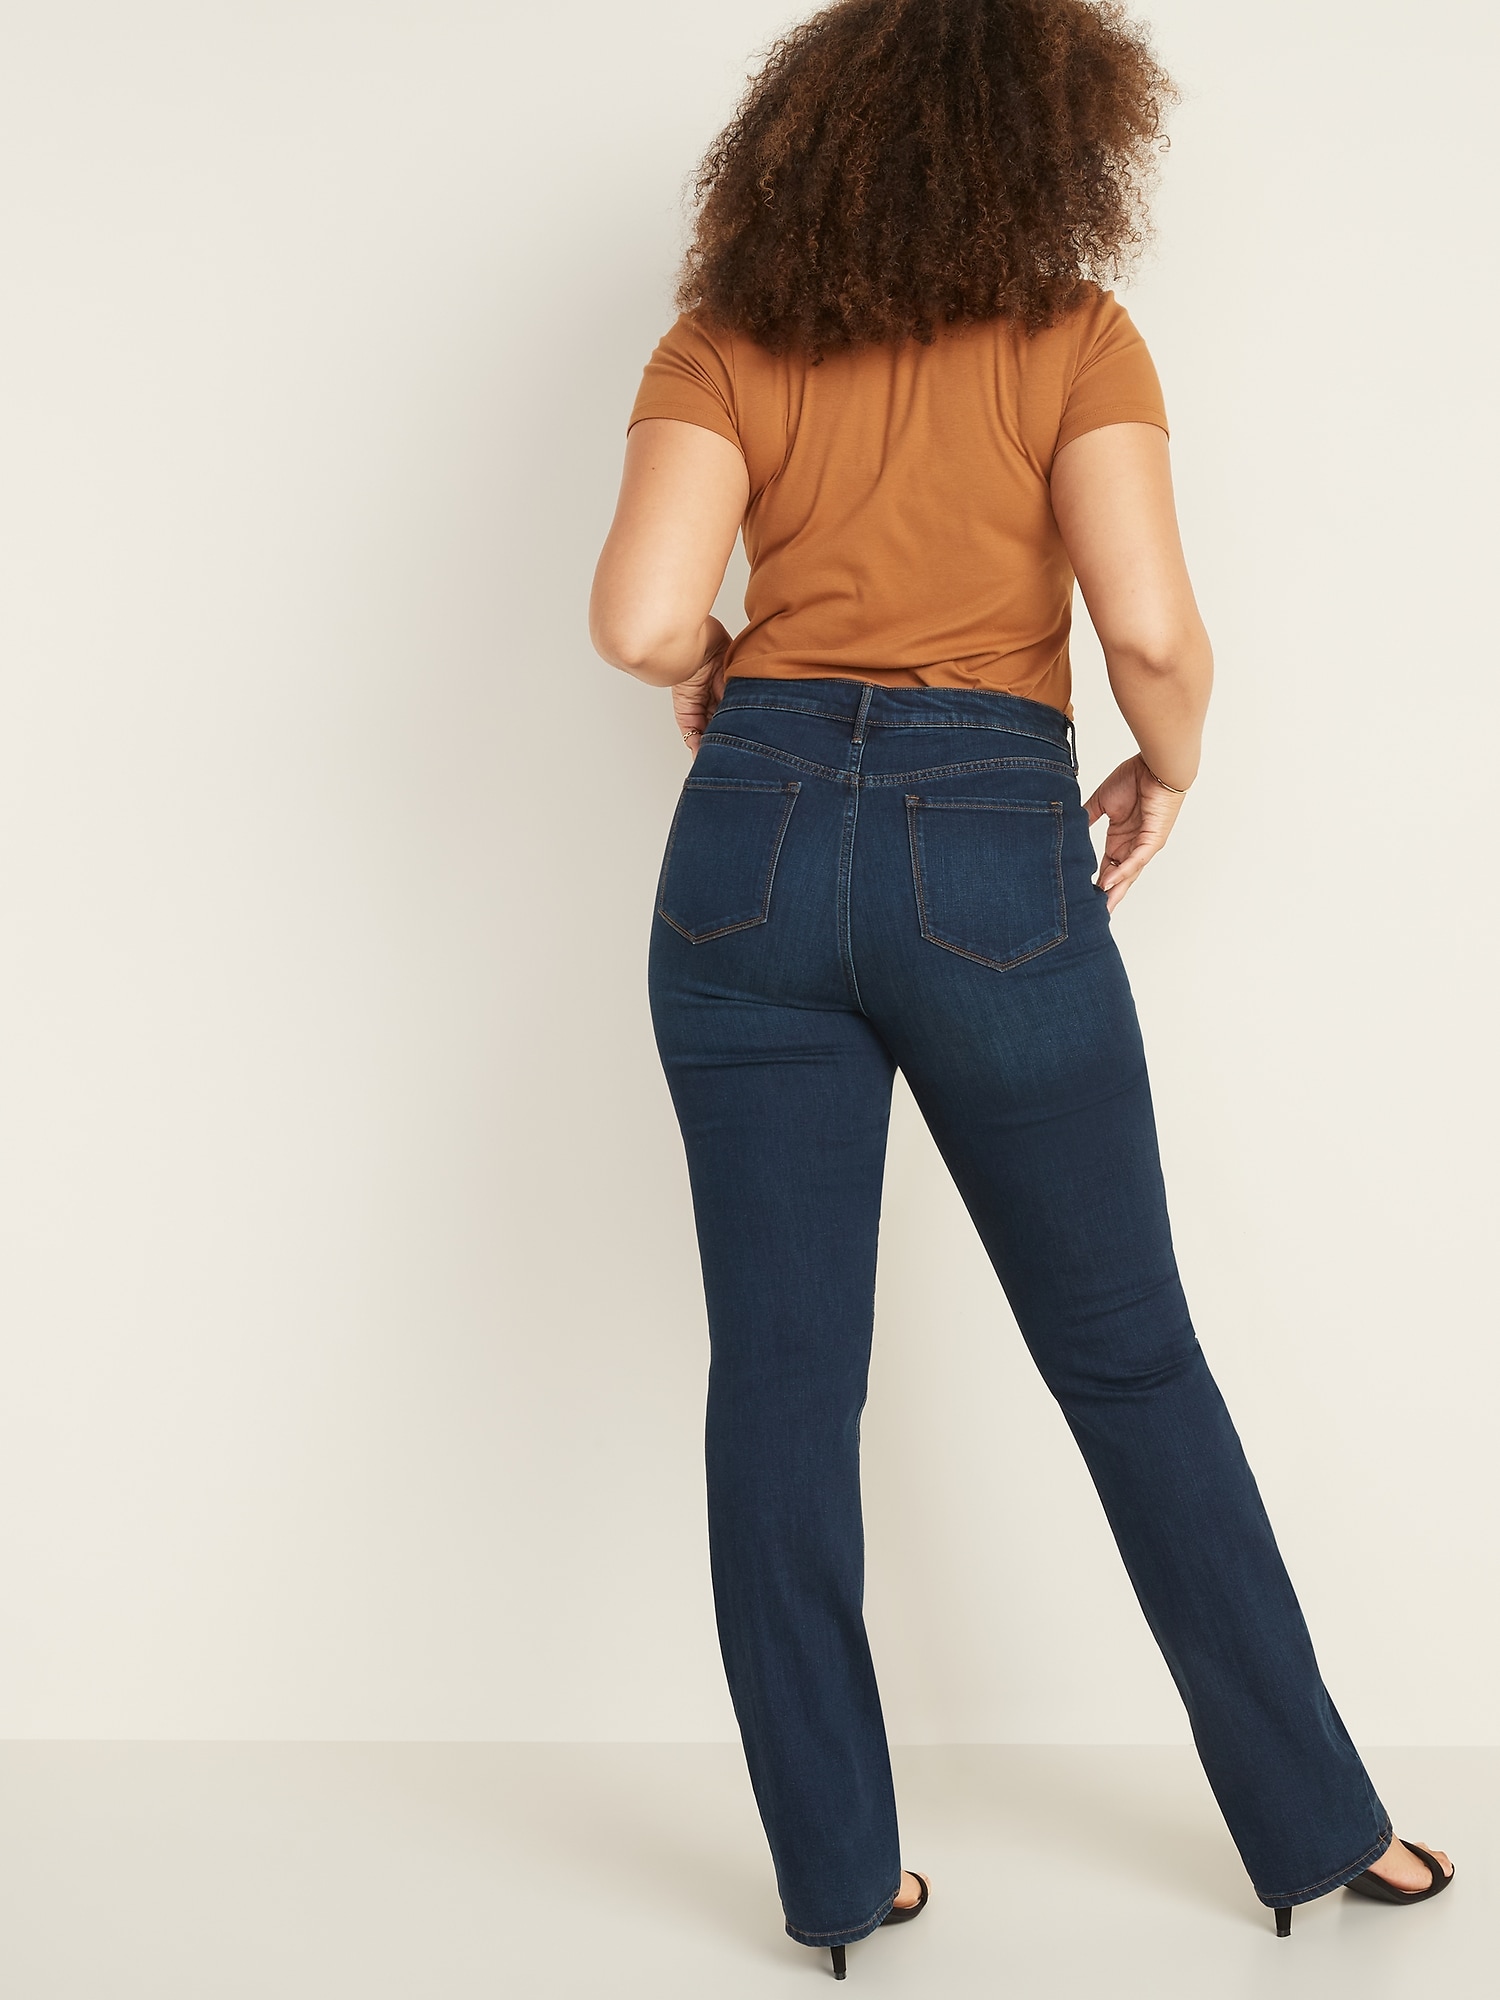 old navy women's curvy bootcut jeans